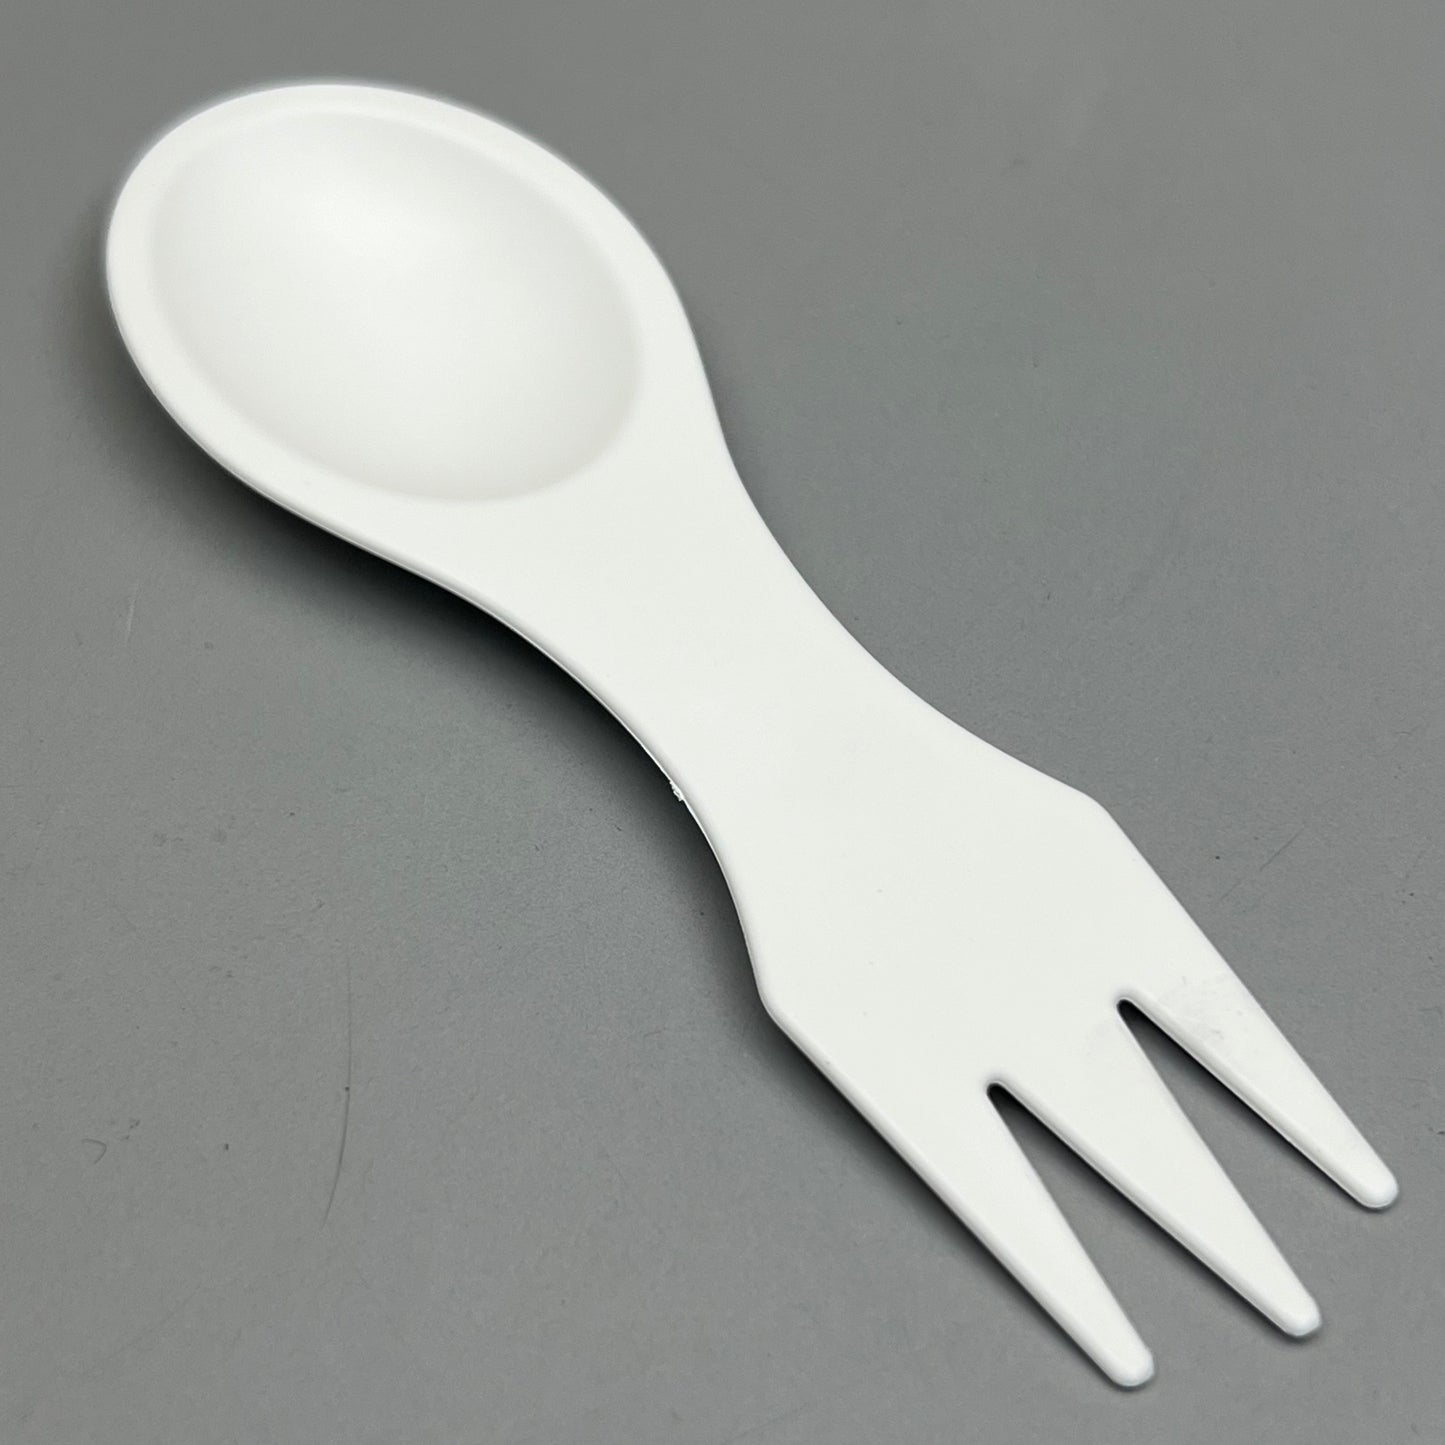 YOURGREEN2GO Sustainable Spoon/Fork Utensil PET (Qty: 2000) Plastic Lids 4.5"